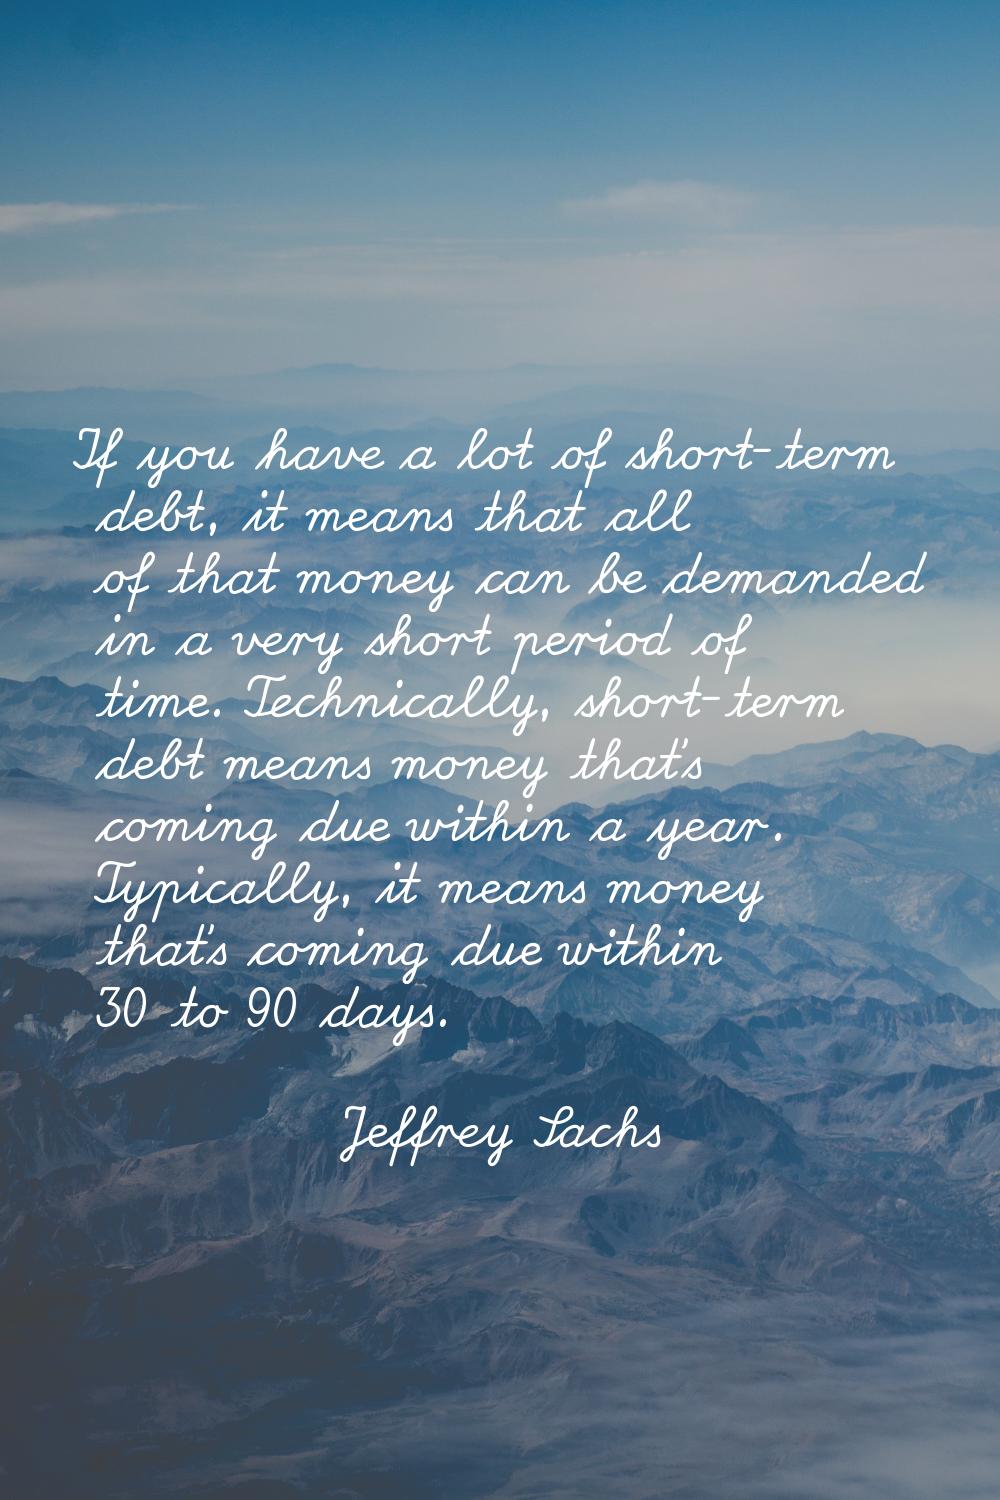 If you have a lot of short-term debt, it means that all of that money can be demanded in a very sho